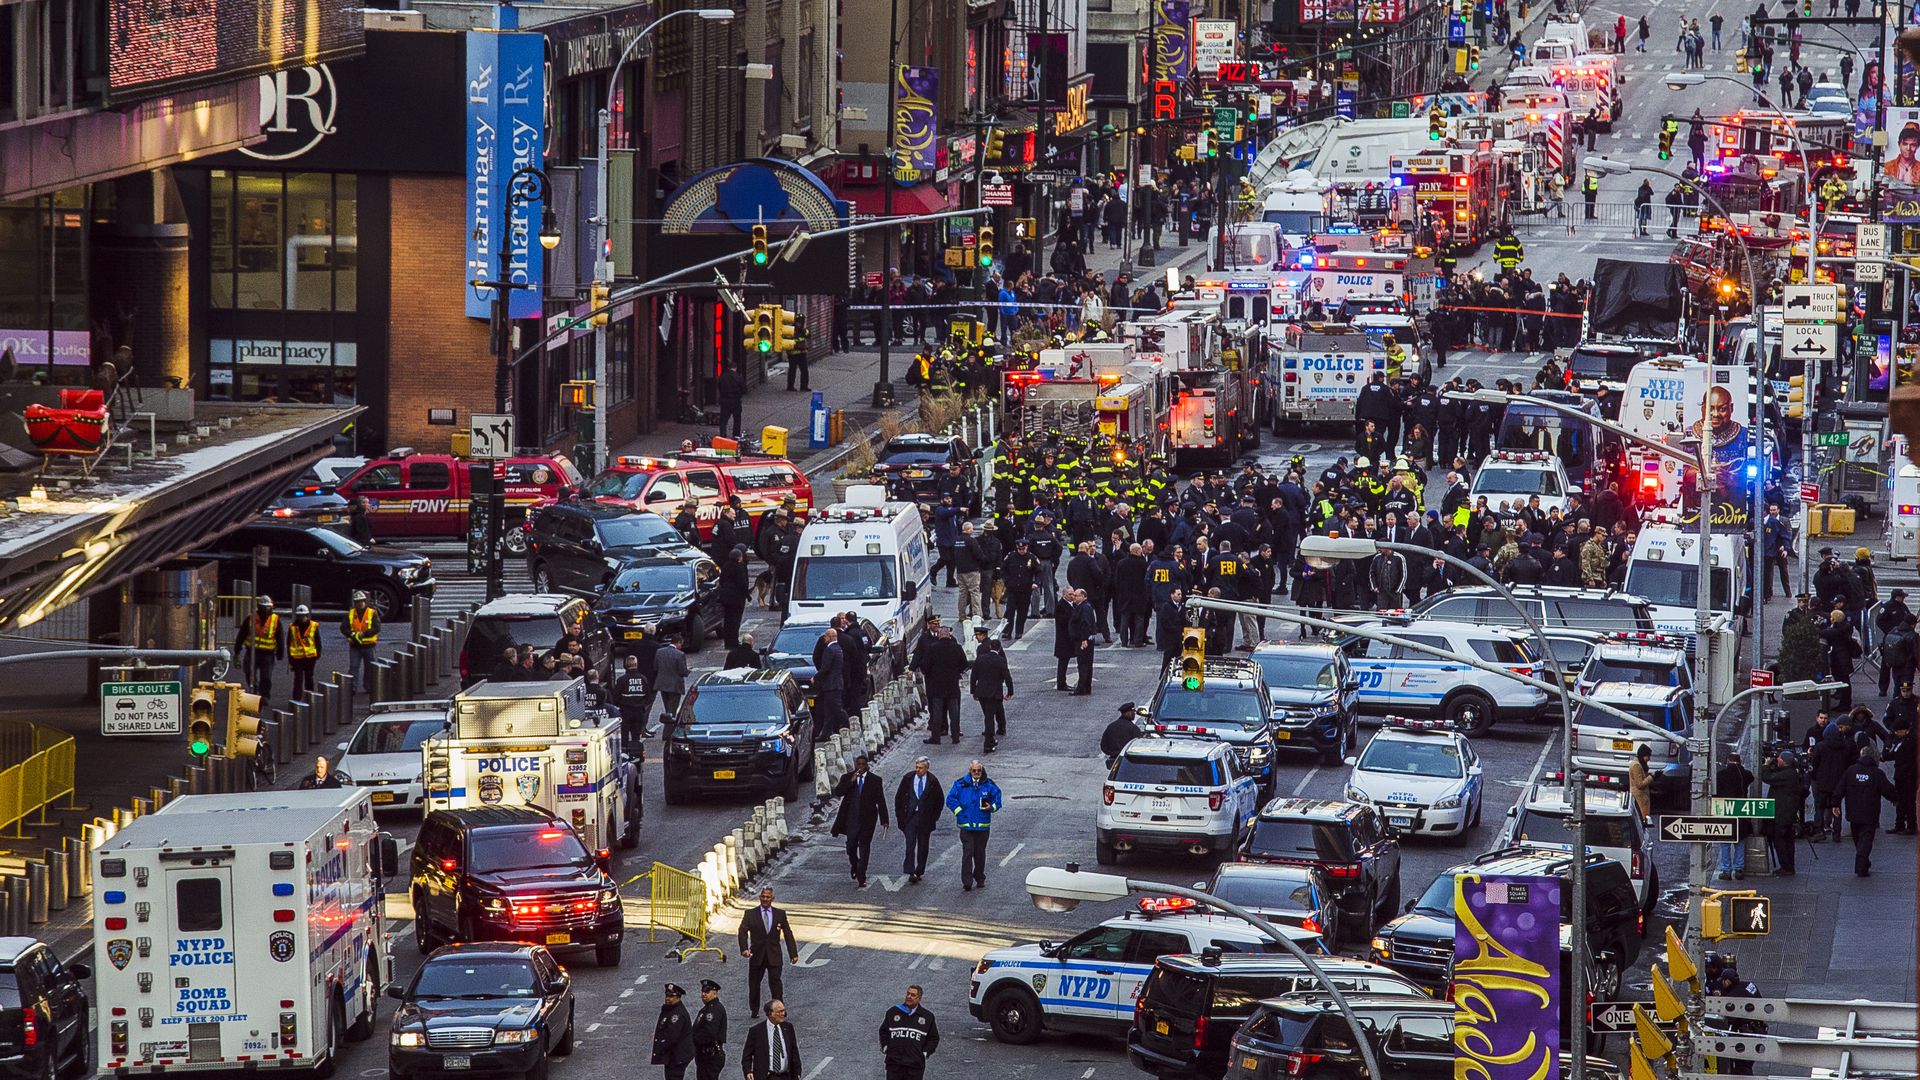 NYC explosion